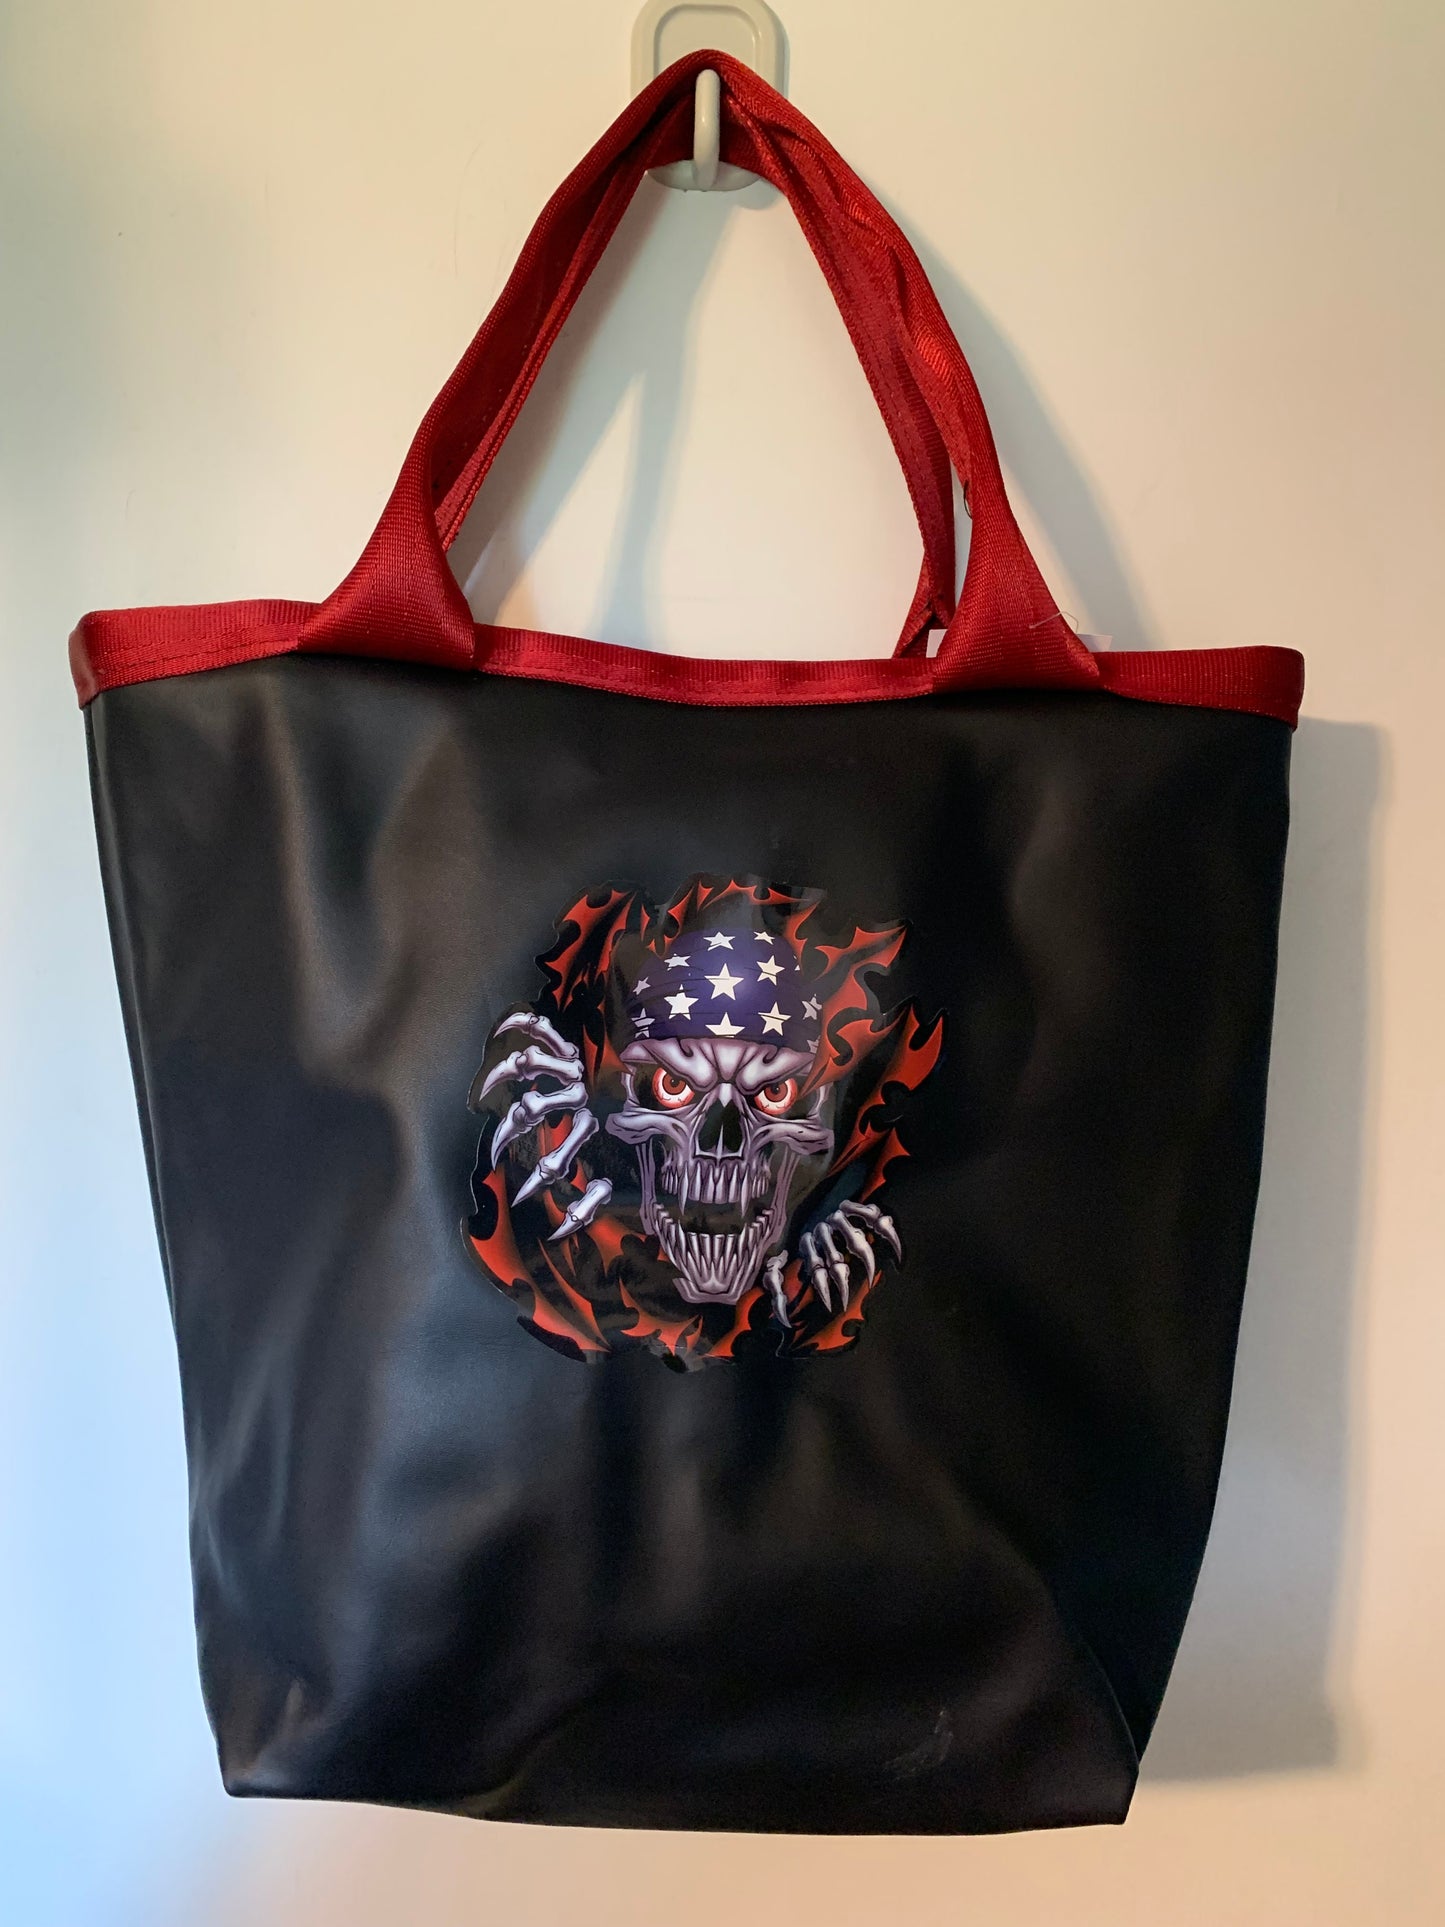 Skull Faux leather tote bag with seatbelt straps & skull decal, vegan leather handbag, men's tote bag, Father's Day Gift